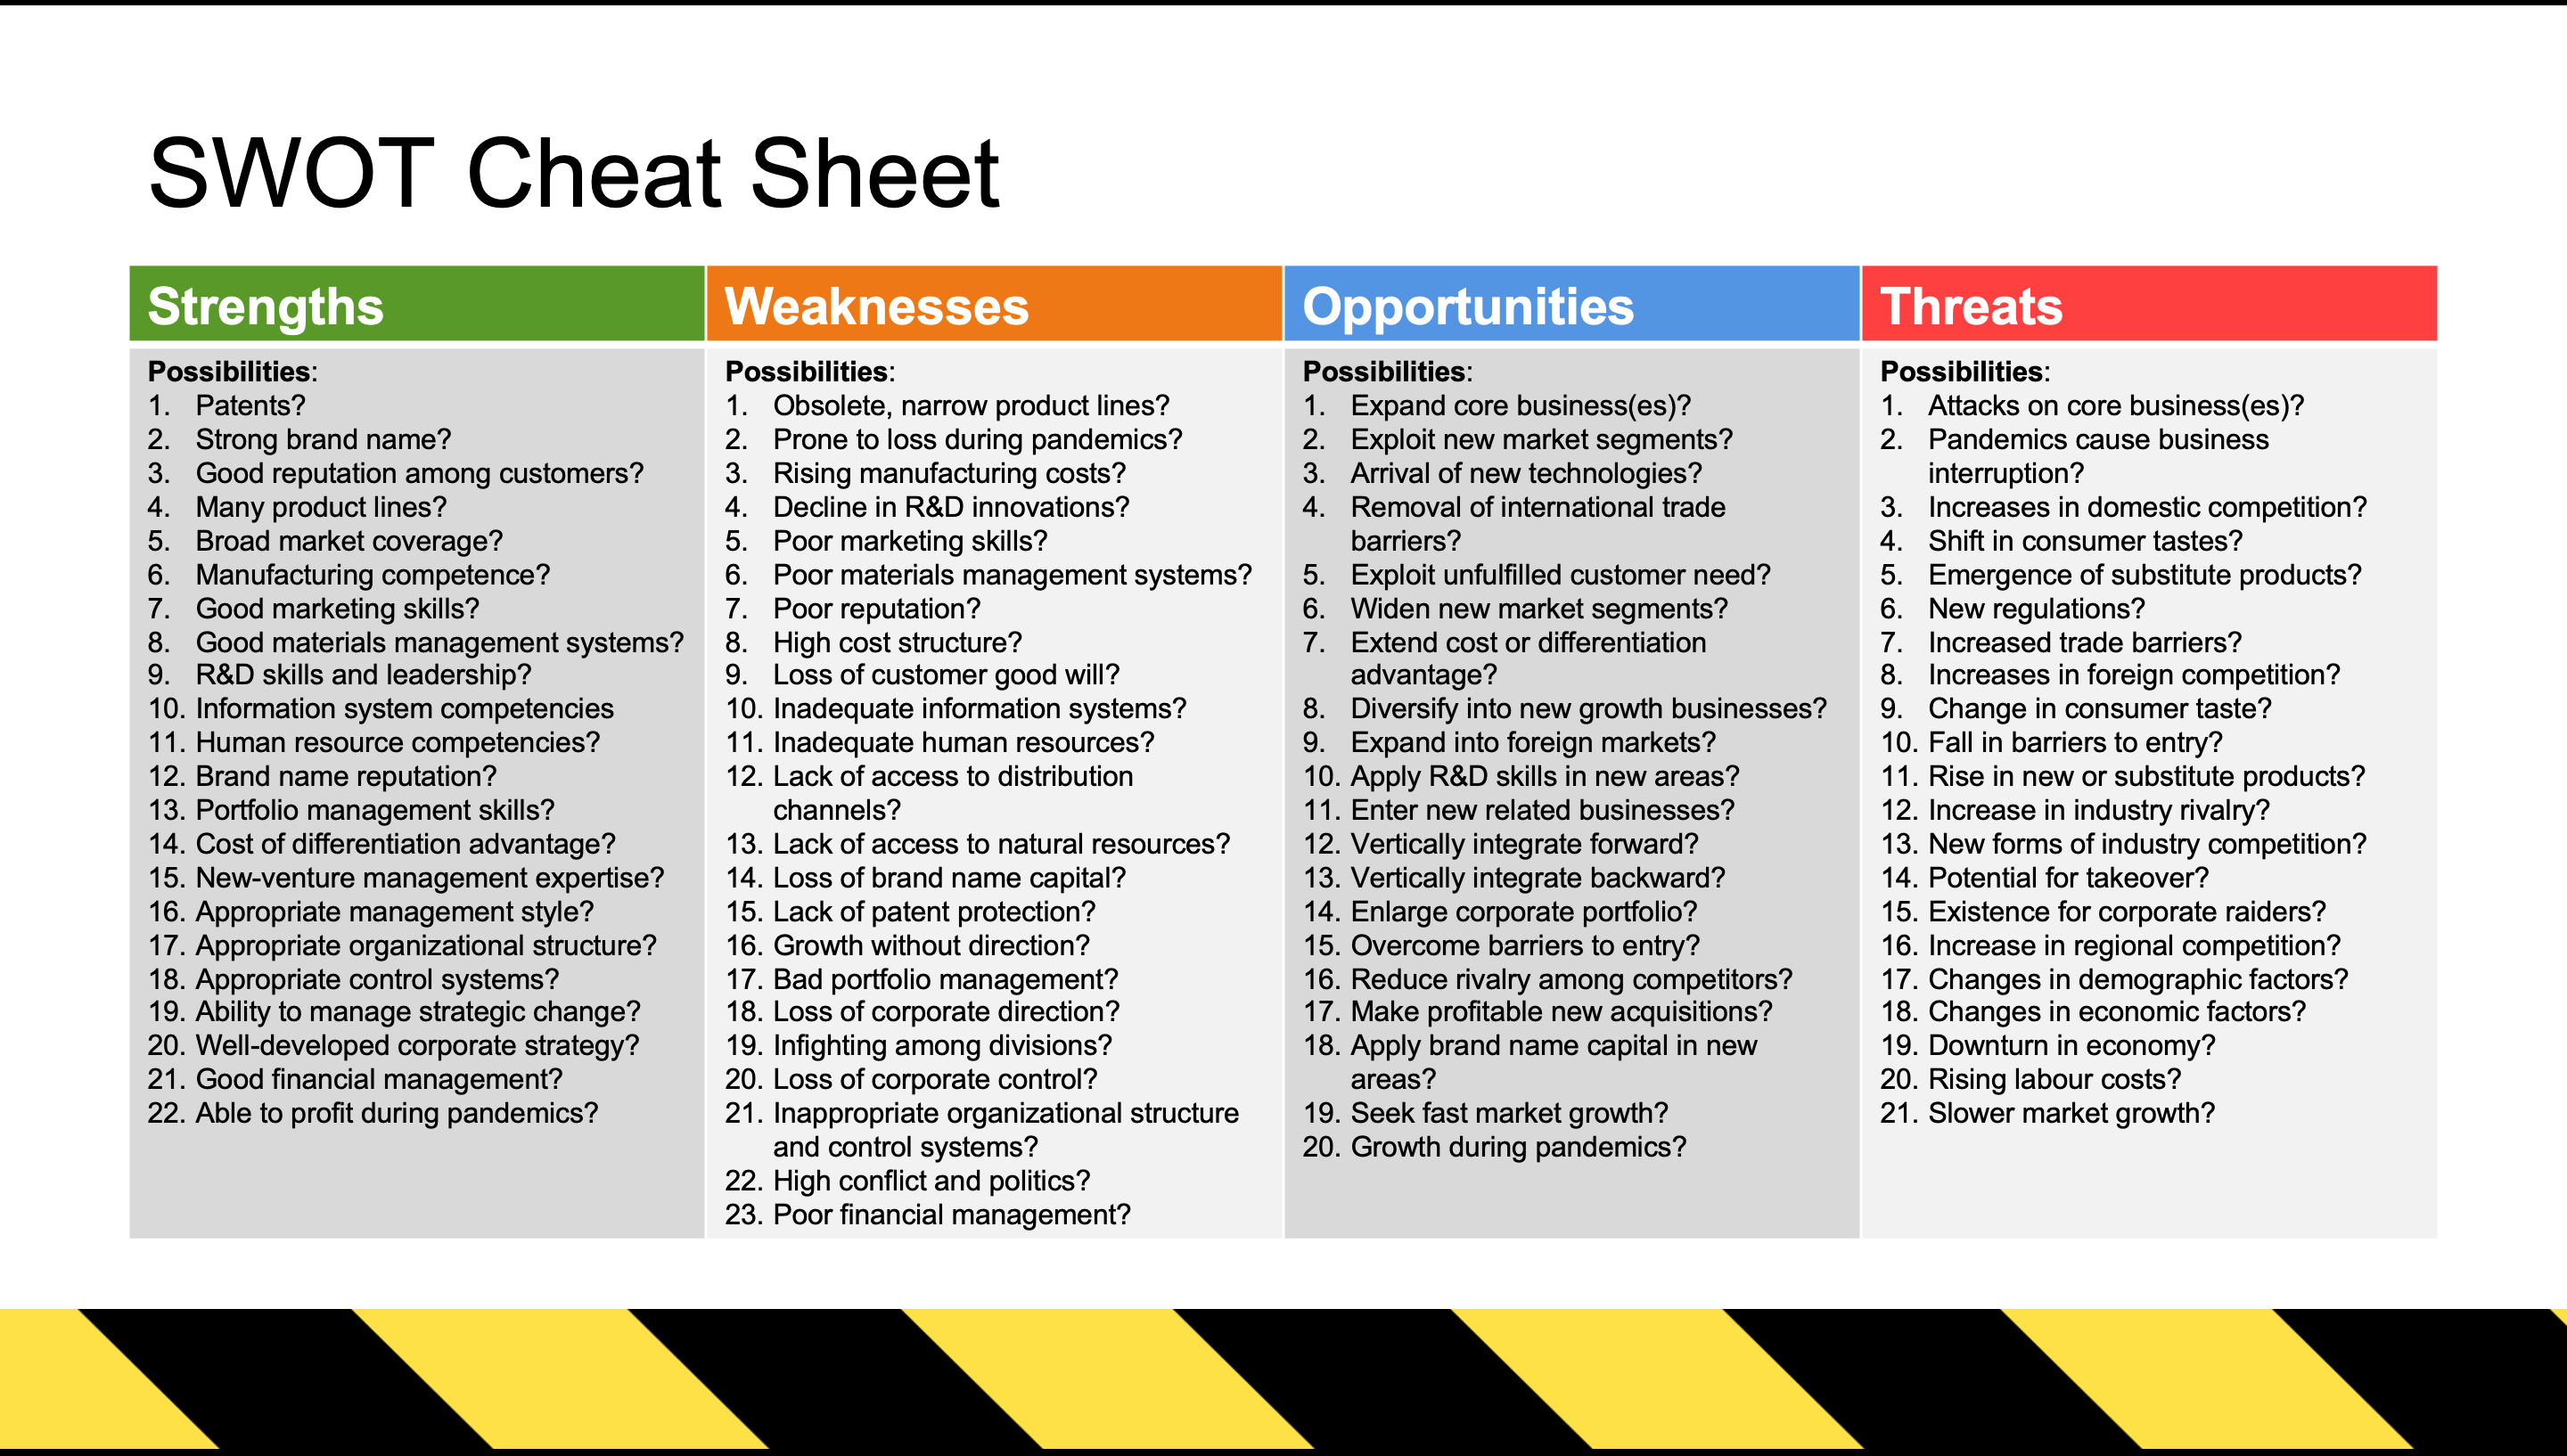 How Do I Run A SWOT Analysis Workshop Business Best Practice